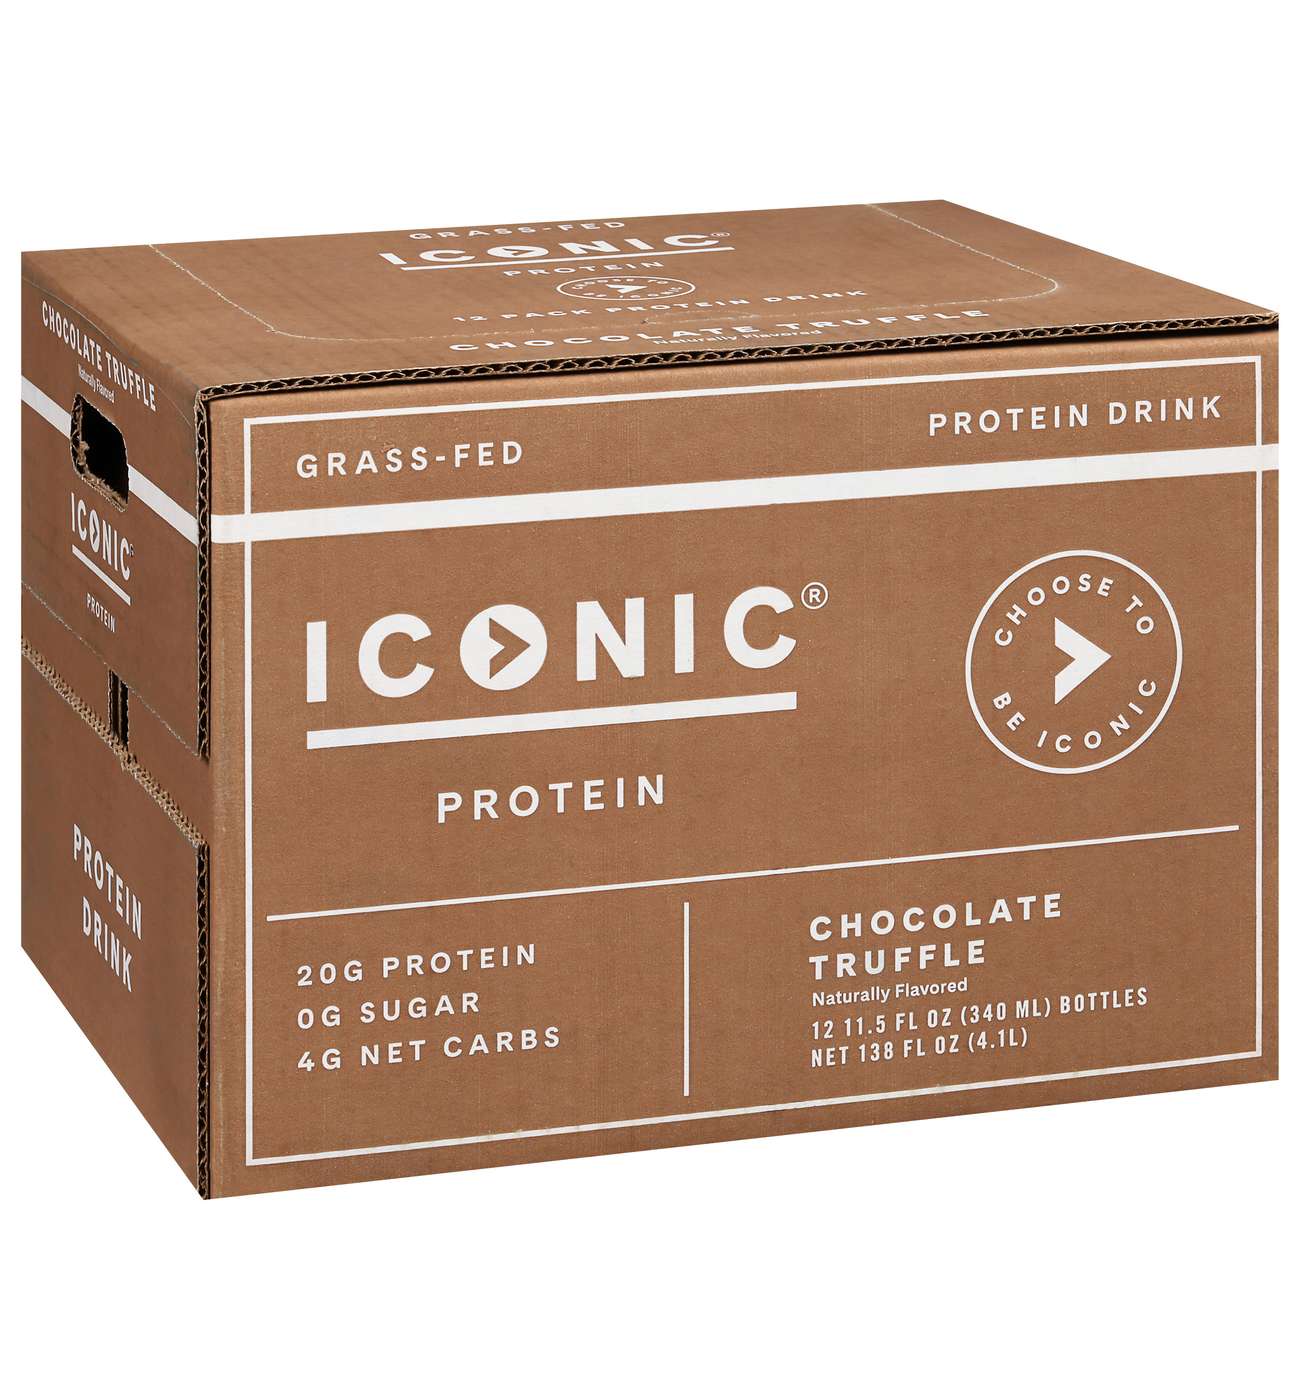 Chocolate Truffle - Iconic Protein, Grass Fed